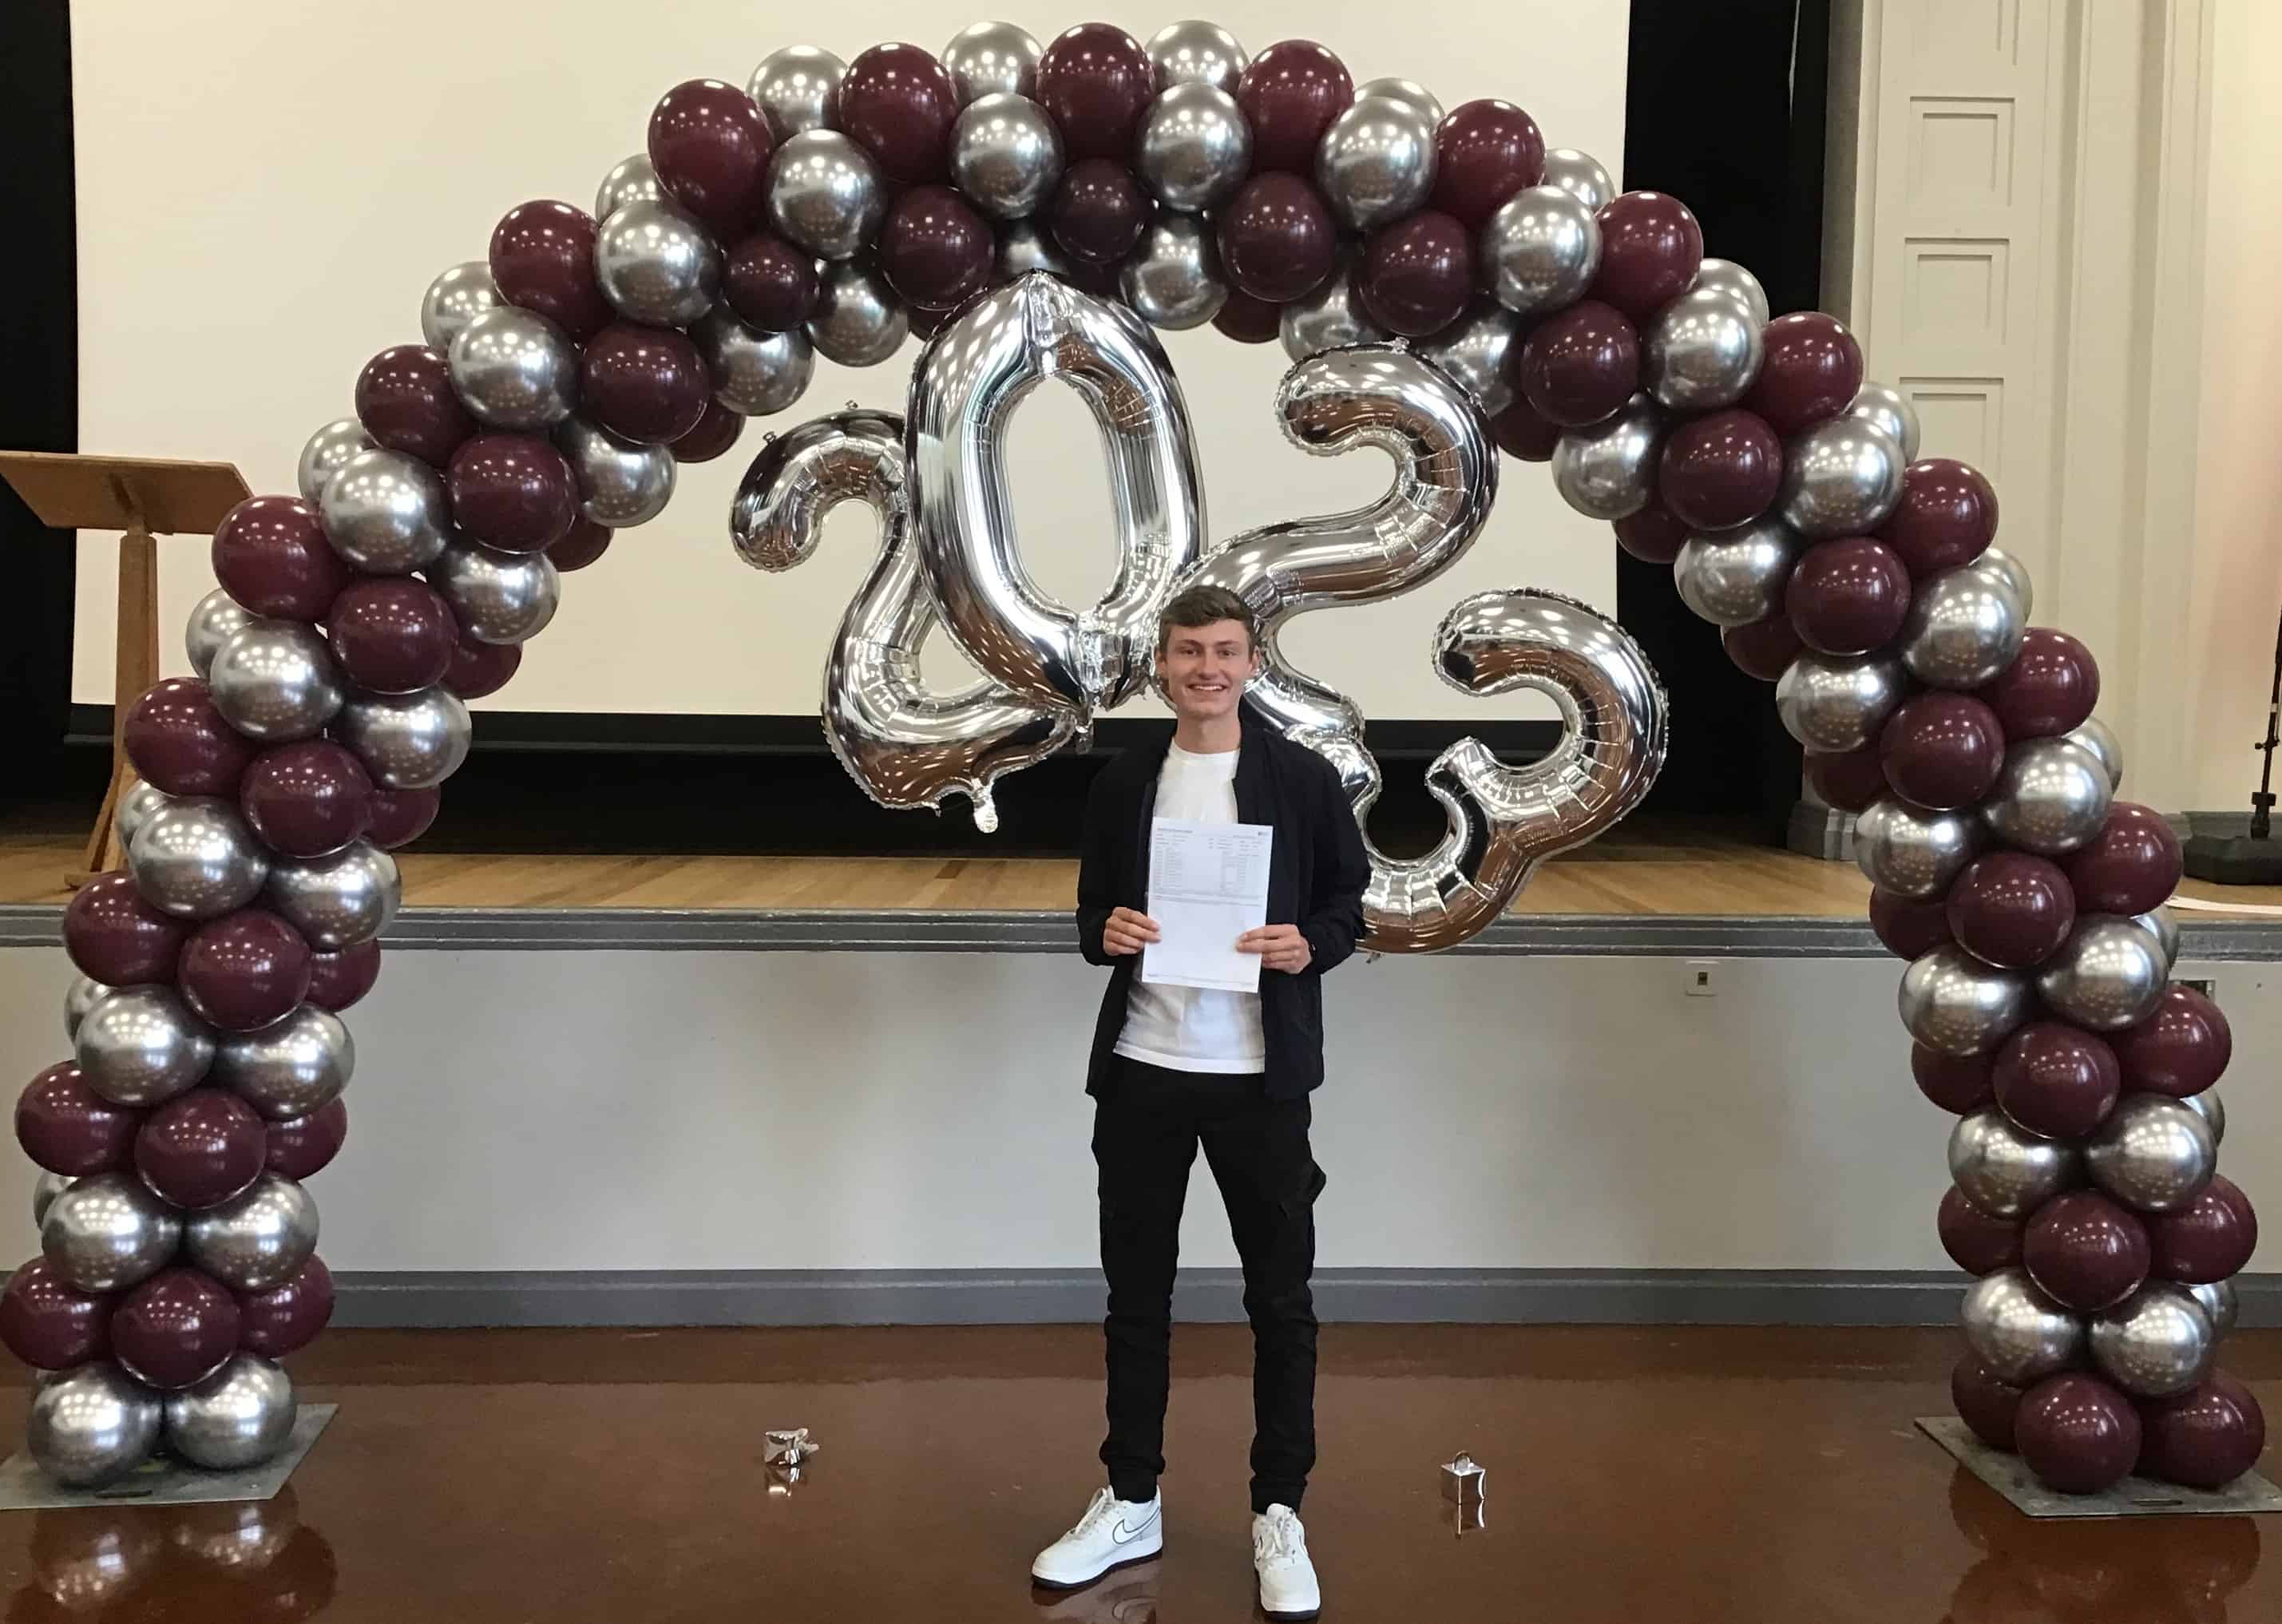 Elliot, Head Boy of Hazel Grove High School, smiles under a balloon arch holding up his results on GCSE results day.